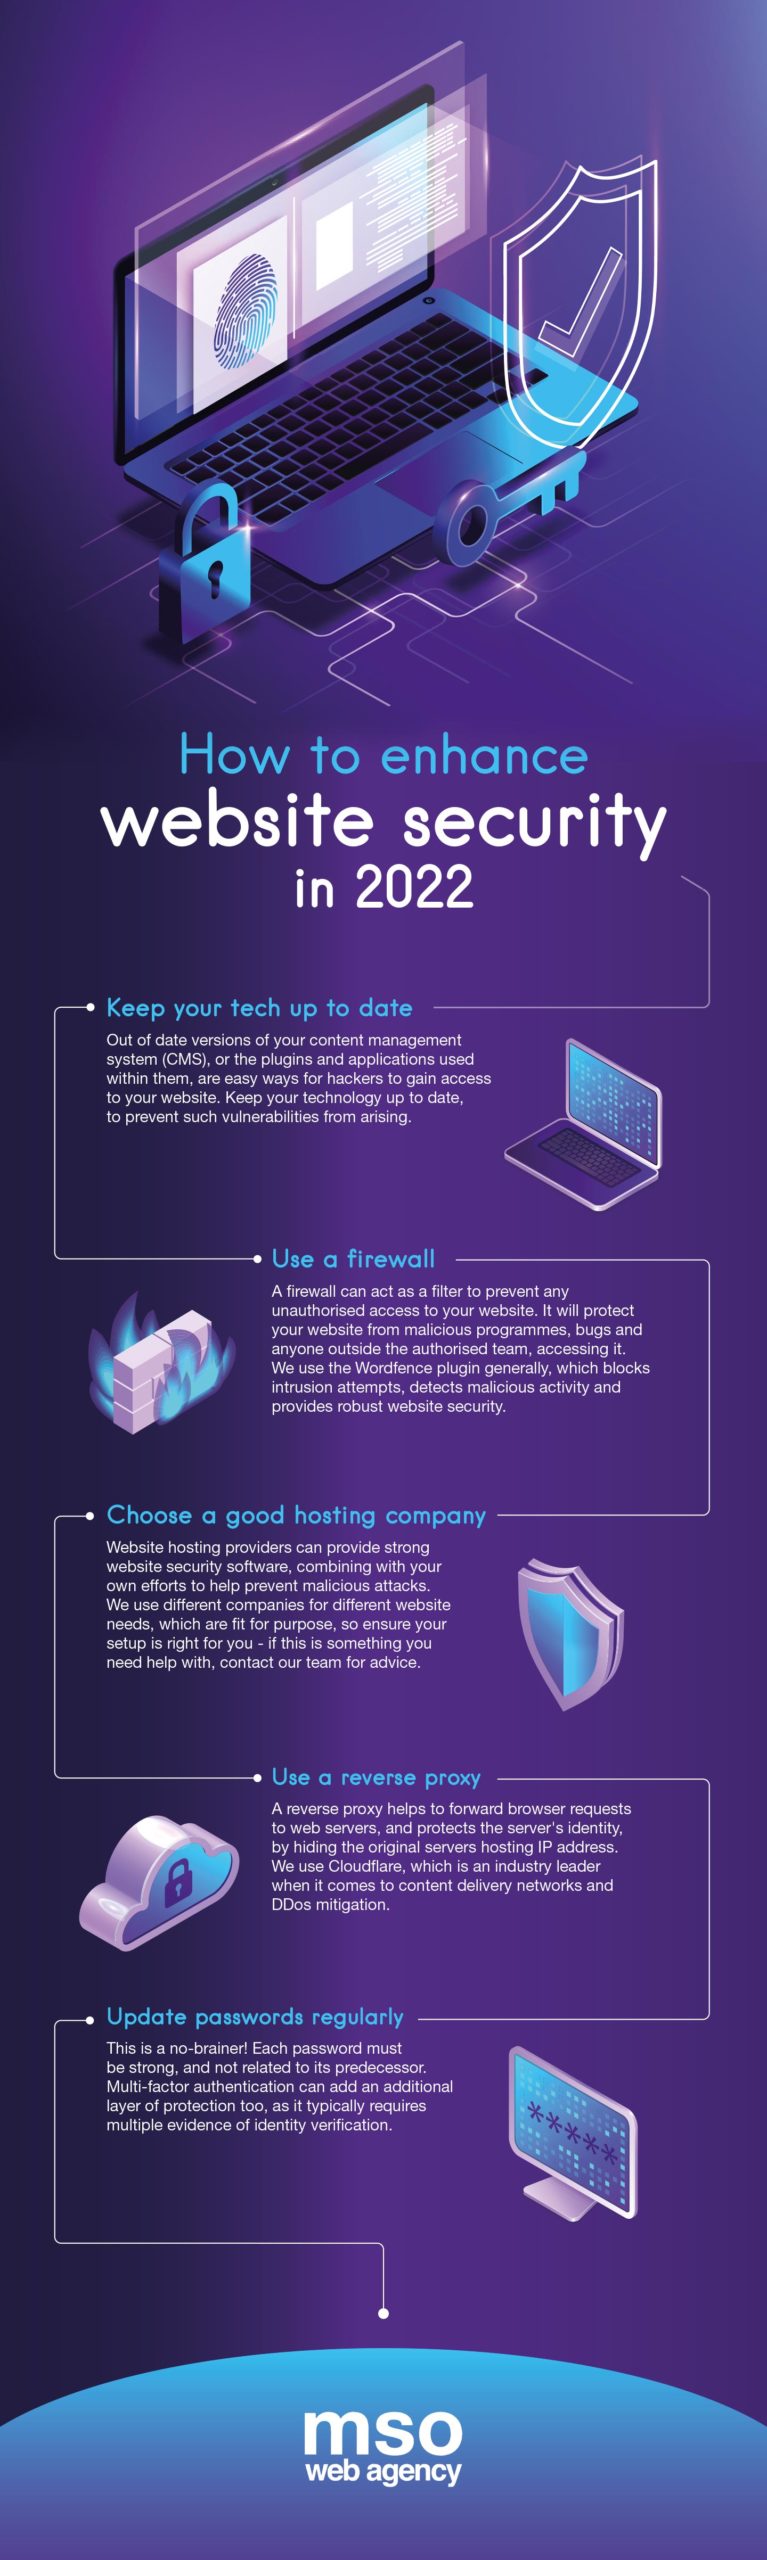 This is an infographic that aims to equip the reader with tips to help keep their website safe, which include keeping the technology up to date, using a firewall, choosing a good hosting company, using a reverse proxy and updating passwords regularly.